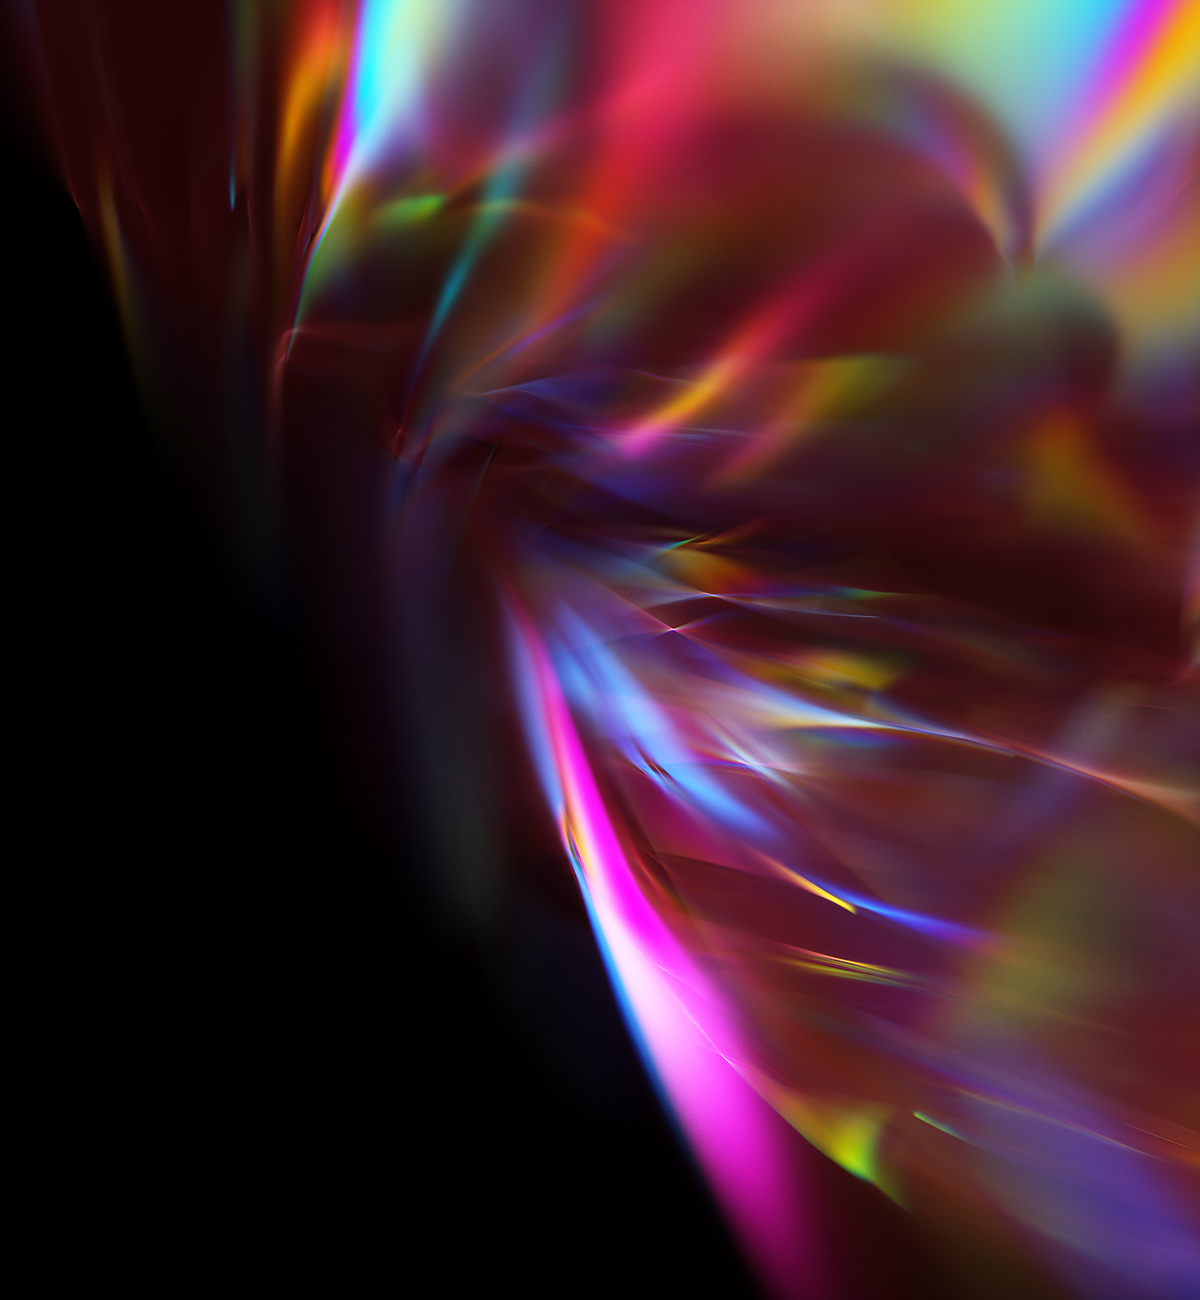 3D refraction reflection Wallpapers Colourful  Young tech Technology speed edge